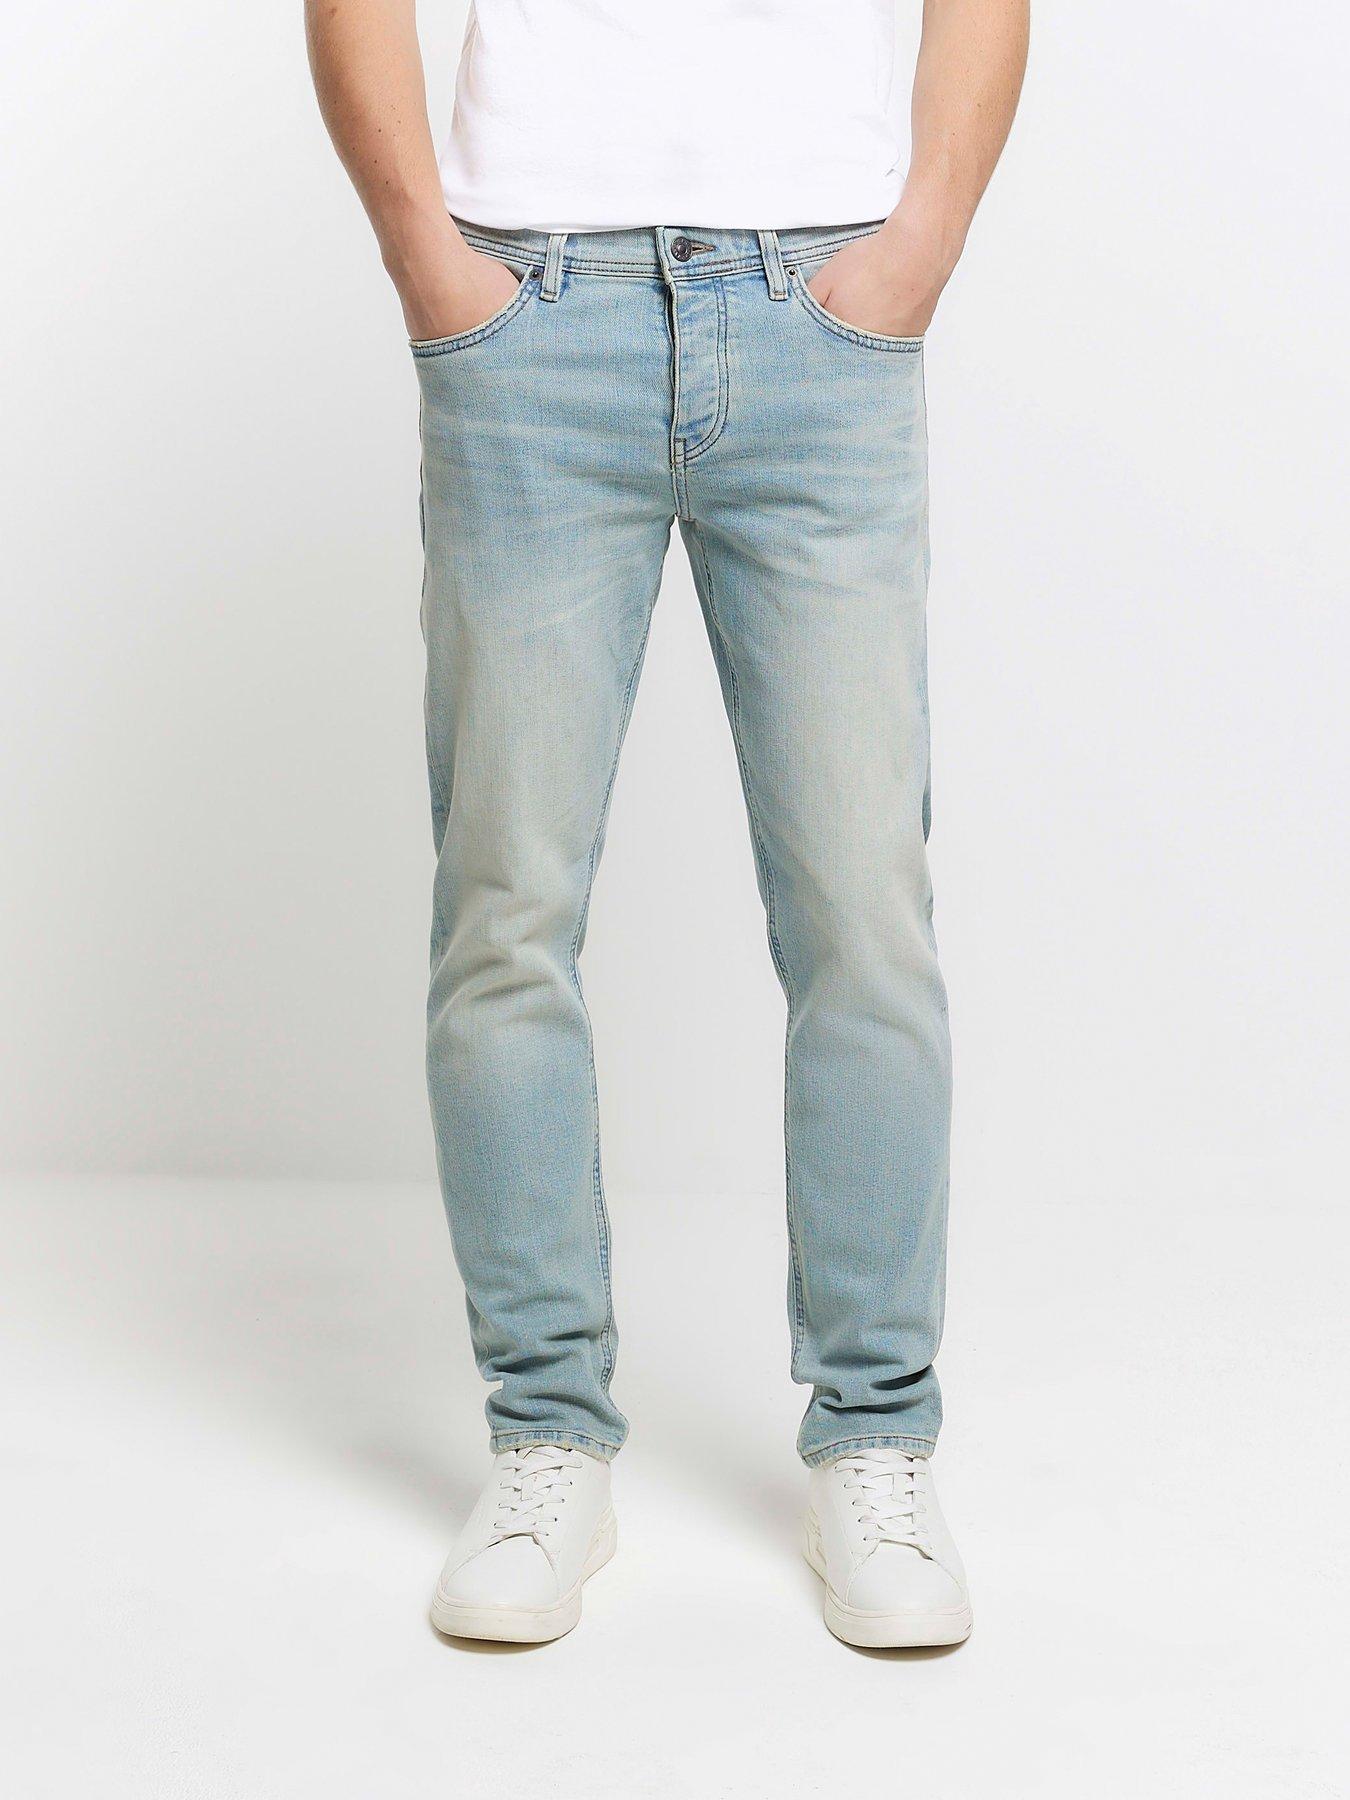 River Island Light Slim Fit Jeans | very.co.uk